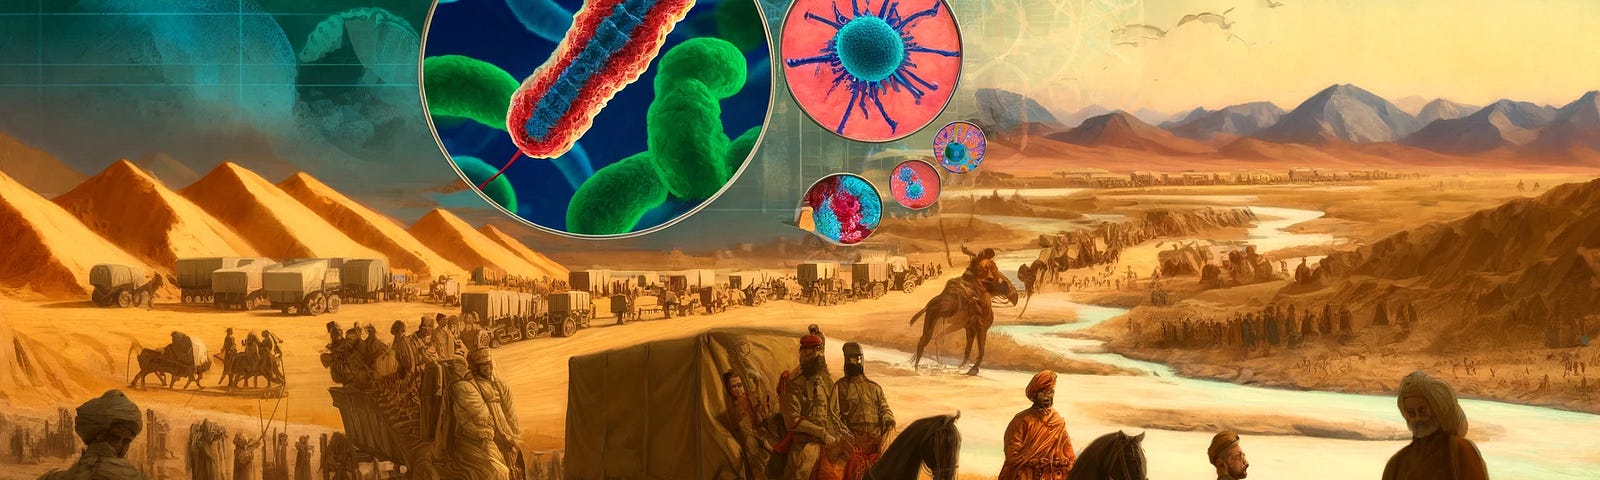 An illustrative image showing the ancient spread of malaria through trade and war. The background features trade caravans crossing desert and mountainous landscapes. In the foreground, historical soldiers from various regions are engaged in battle. Overlaid are magnified images of Plasmodium parasites and strands of ancient DNA. The scene blends warm earthy tones of historical settings with cool blues and greens representing the scientific elements.